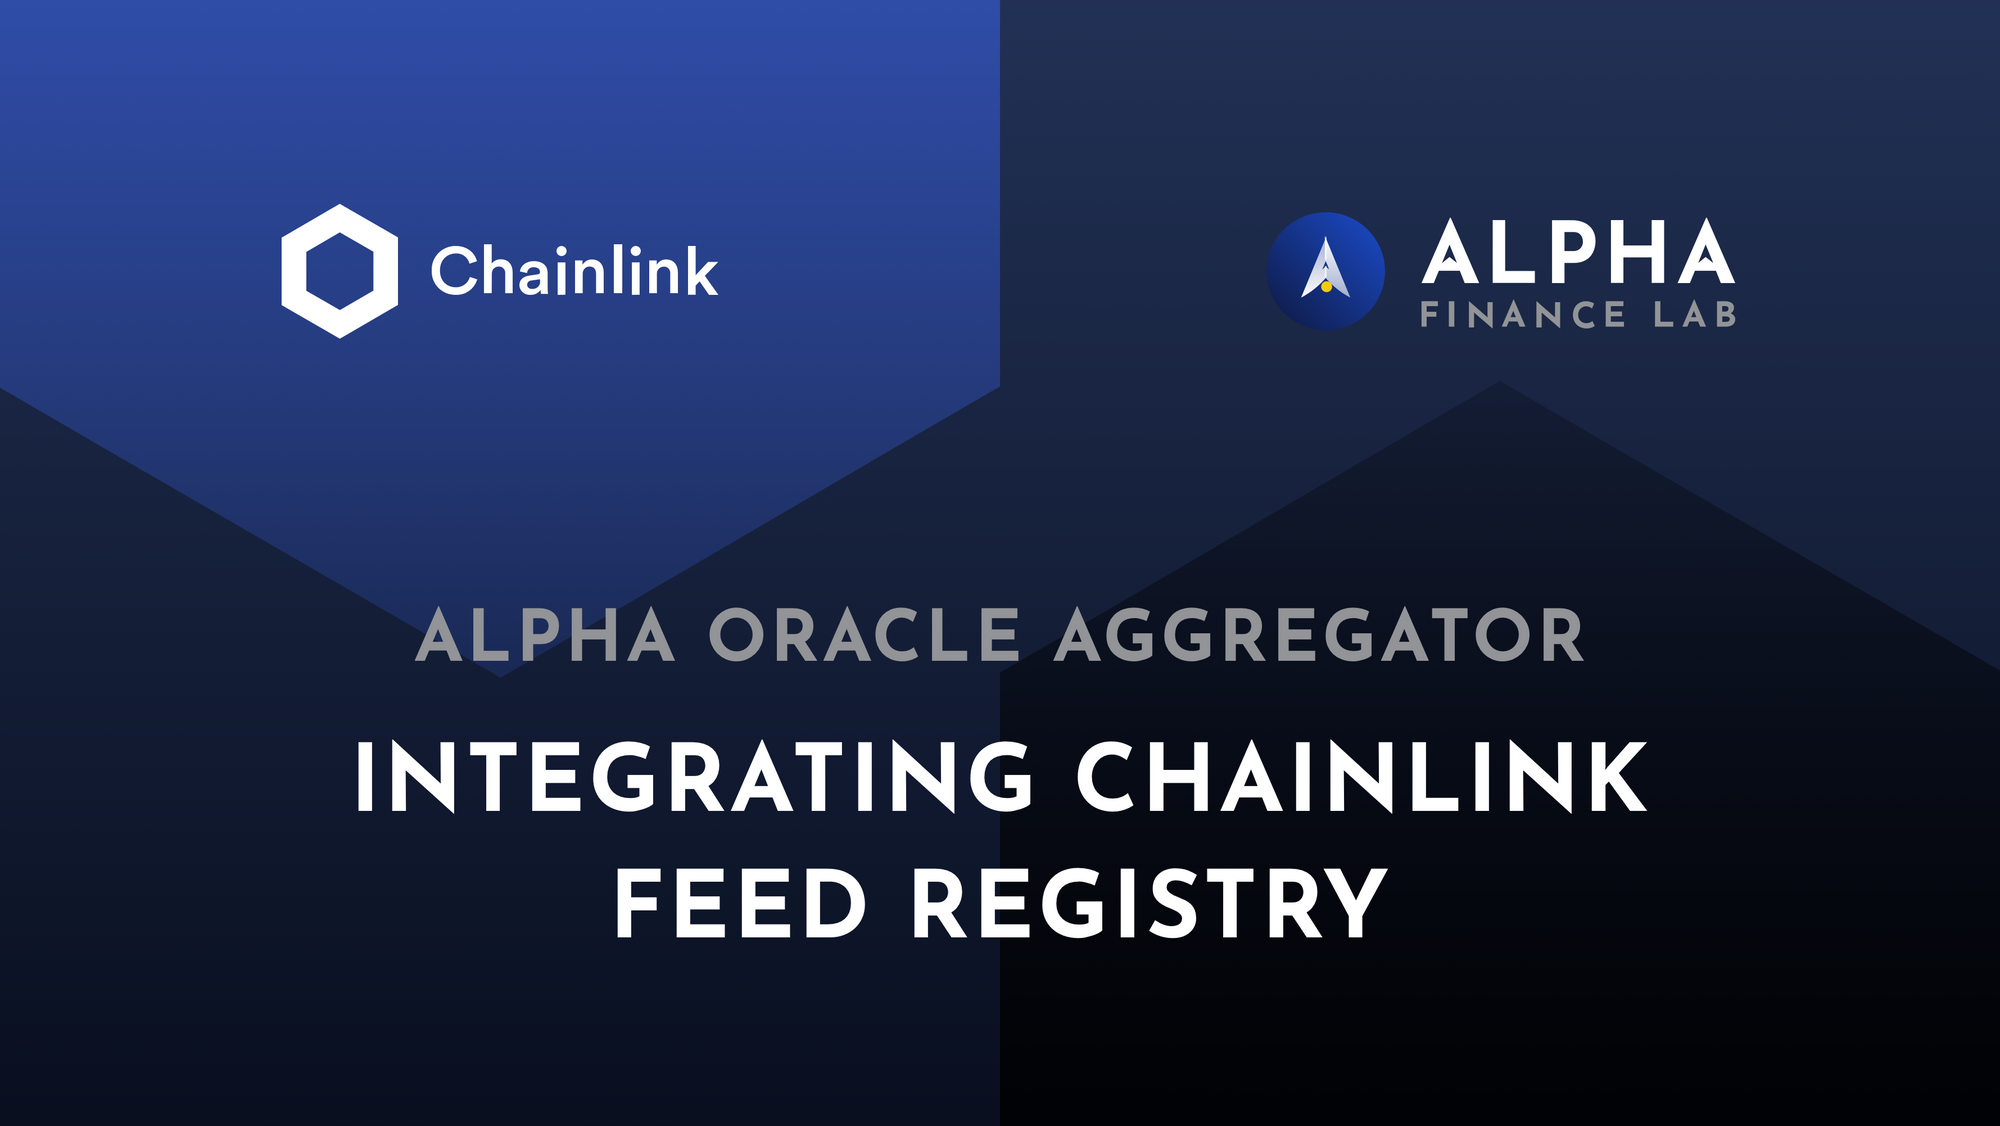 Alpha Oracle Aggregator - Integrating Chainlink Feed Registry